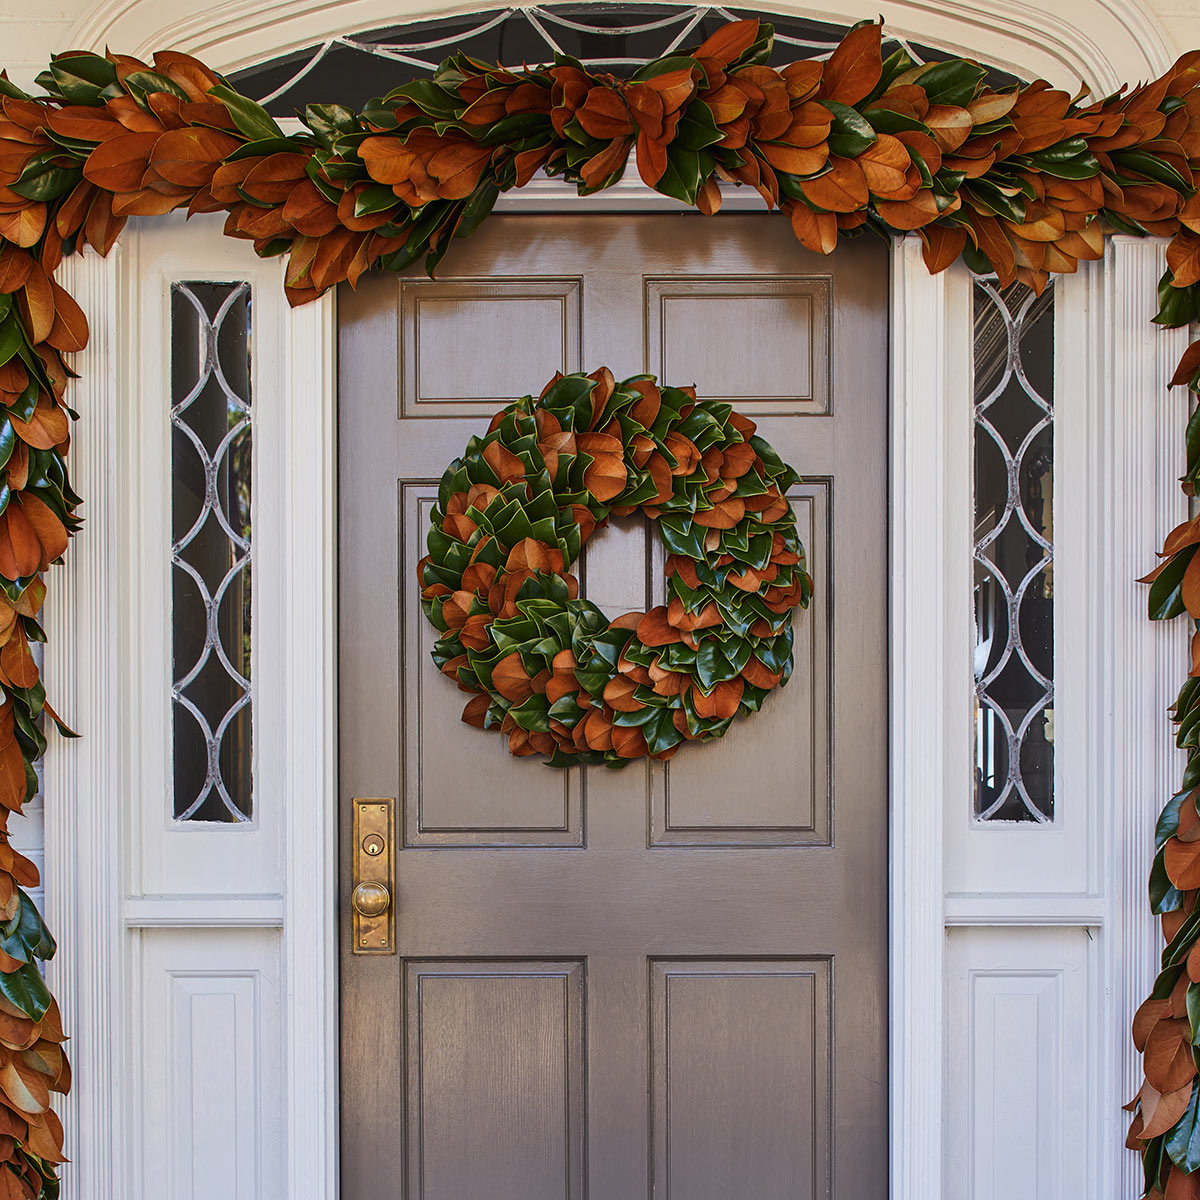 Space-saving solution: Hang your wreath on a stand